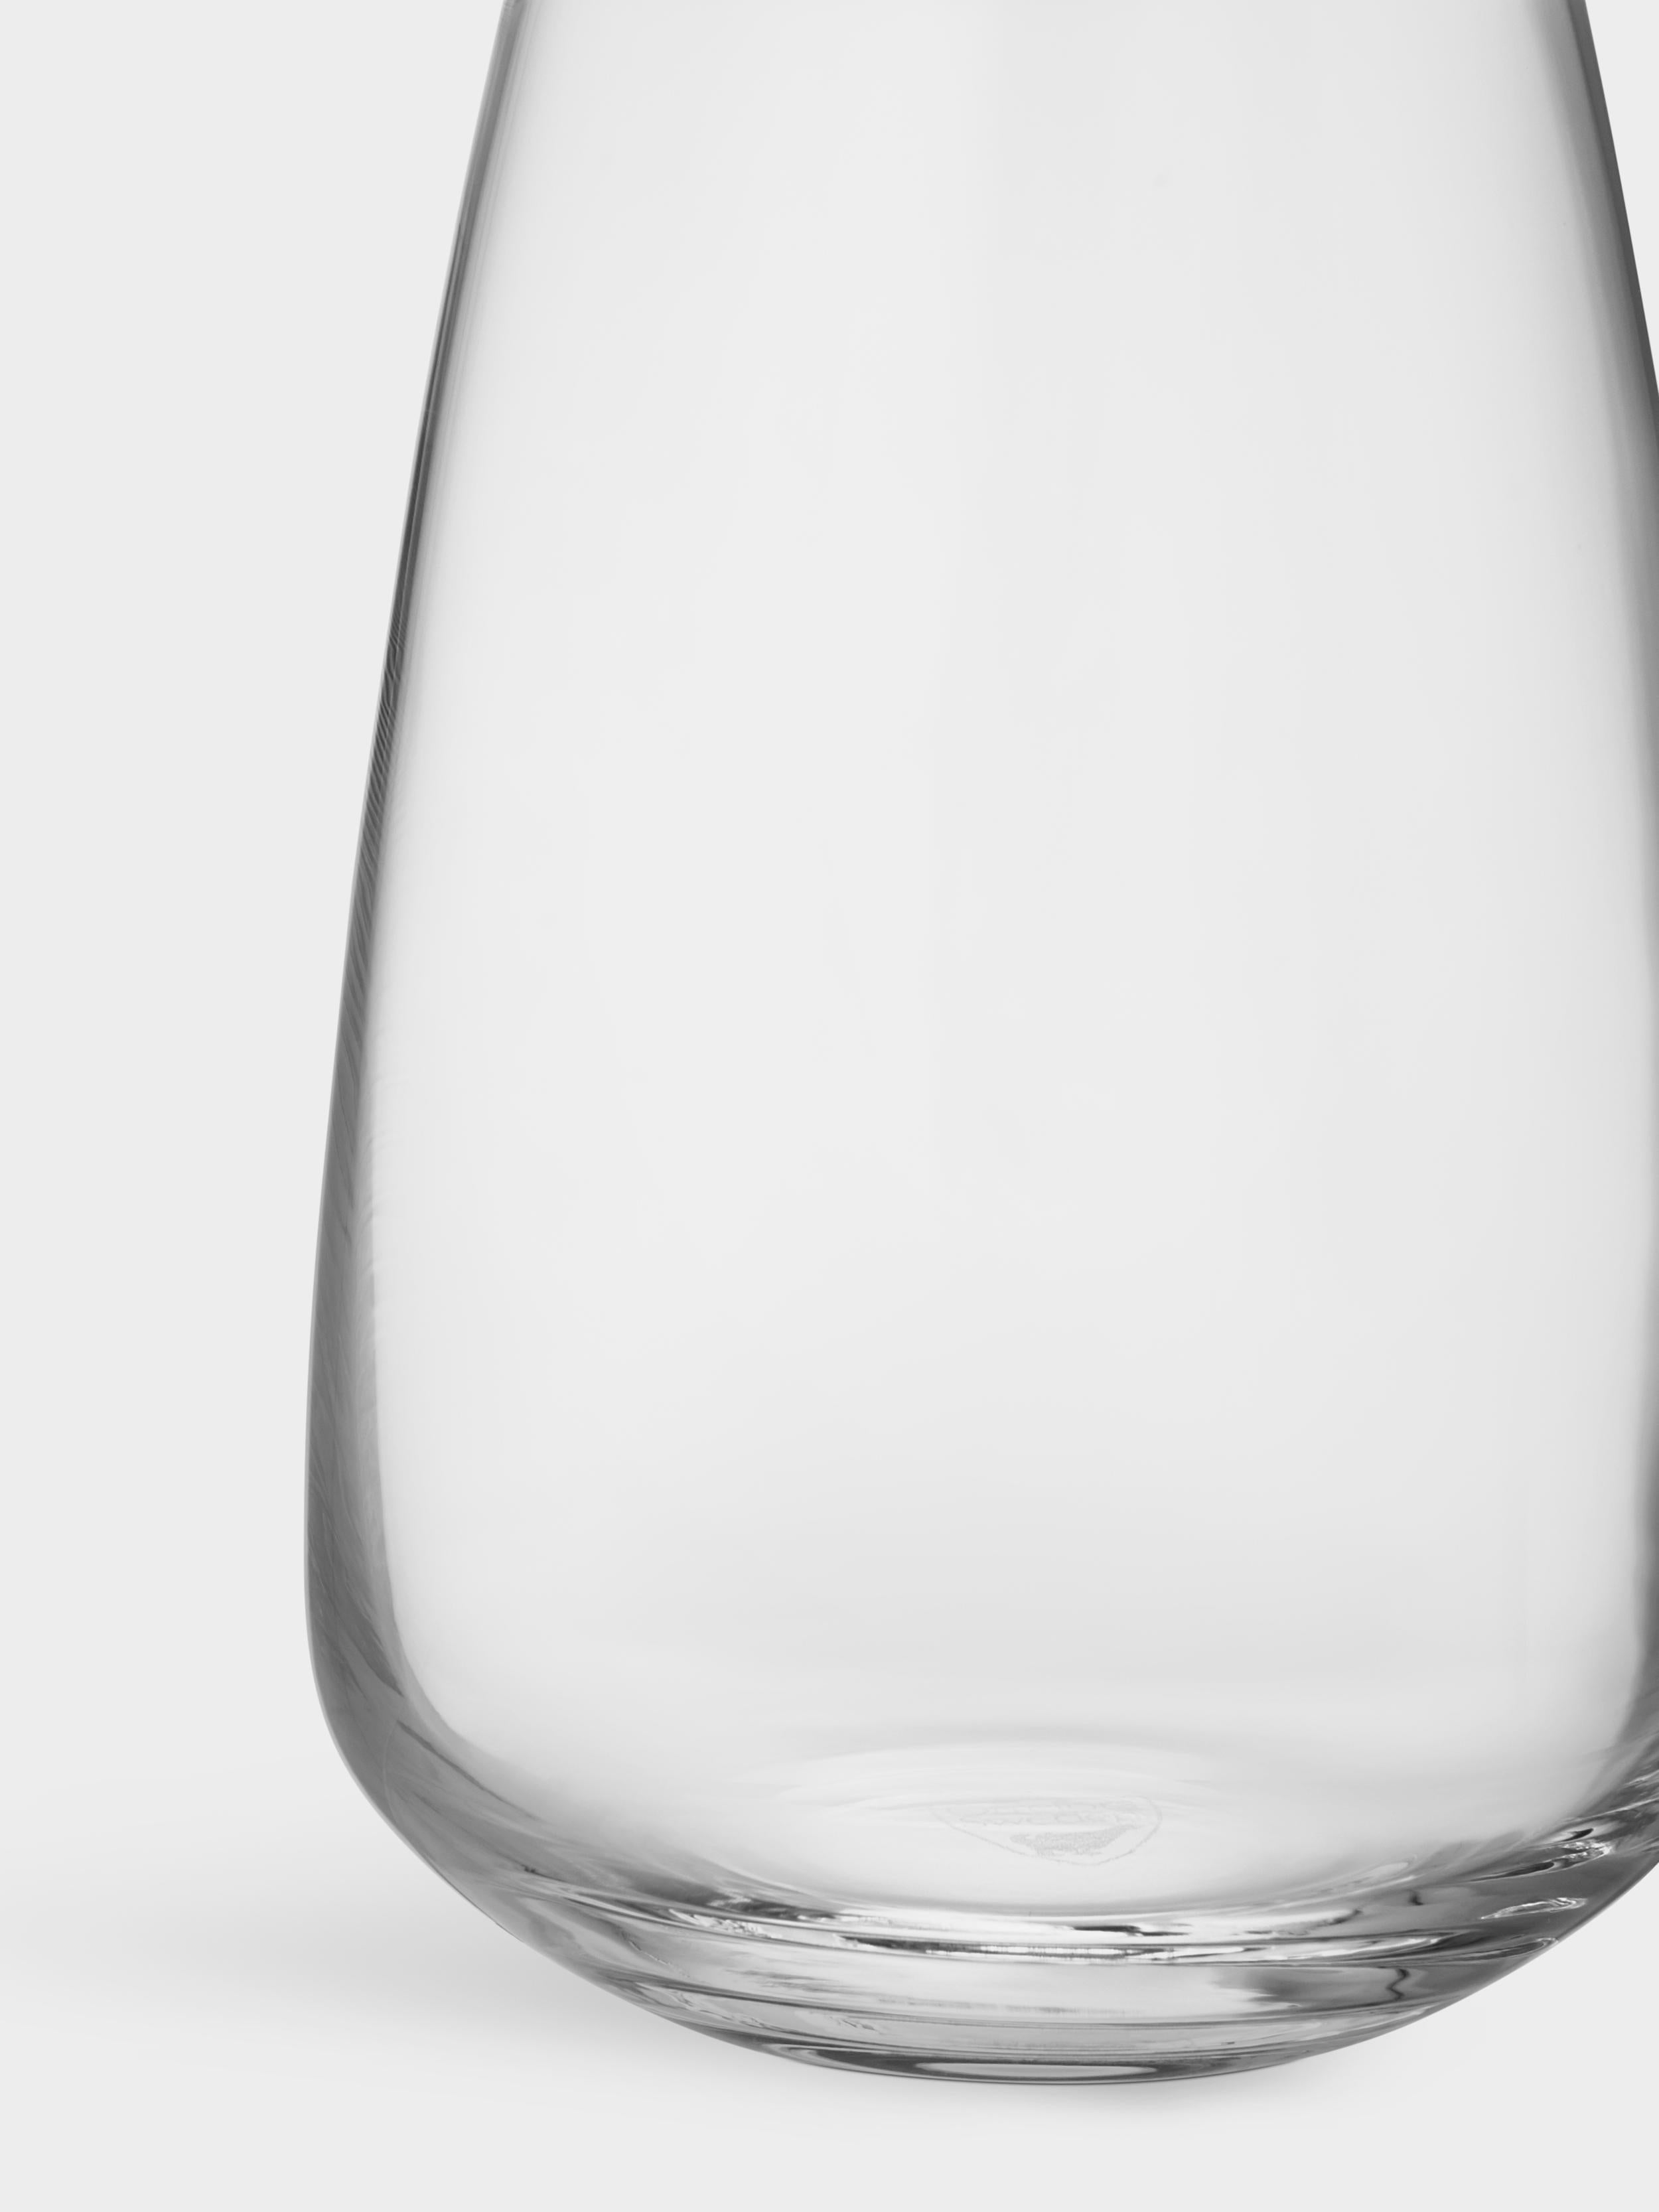 Pulse Tumbler from Orrefors, which holds 11.5 oz, is an all-purpose glass. Shaped like a wine bowl, the design is influenced by Scandinavian simplicity. Designed by Ingegerd Råman.
